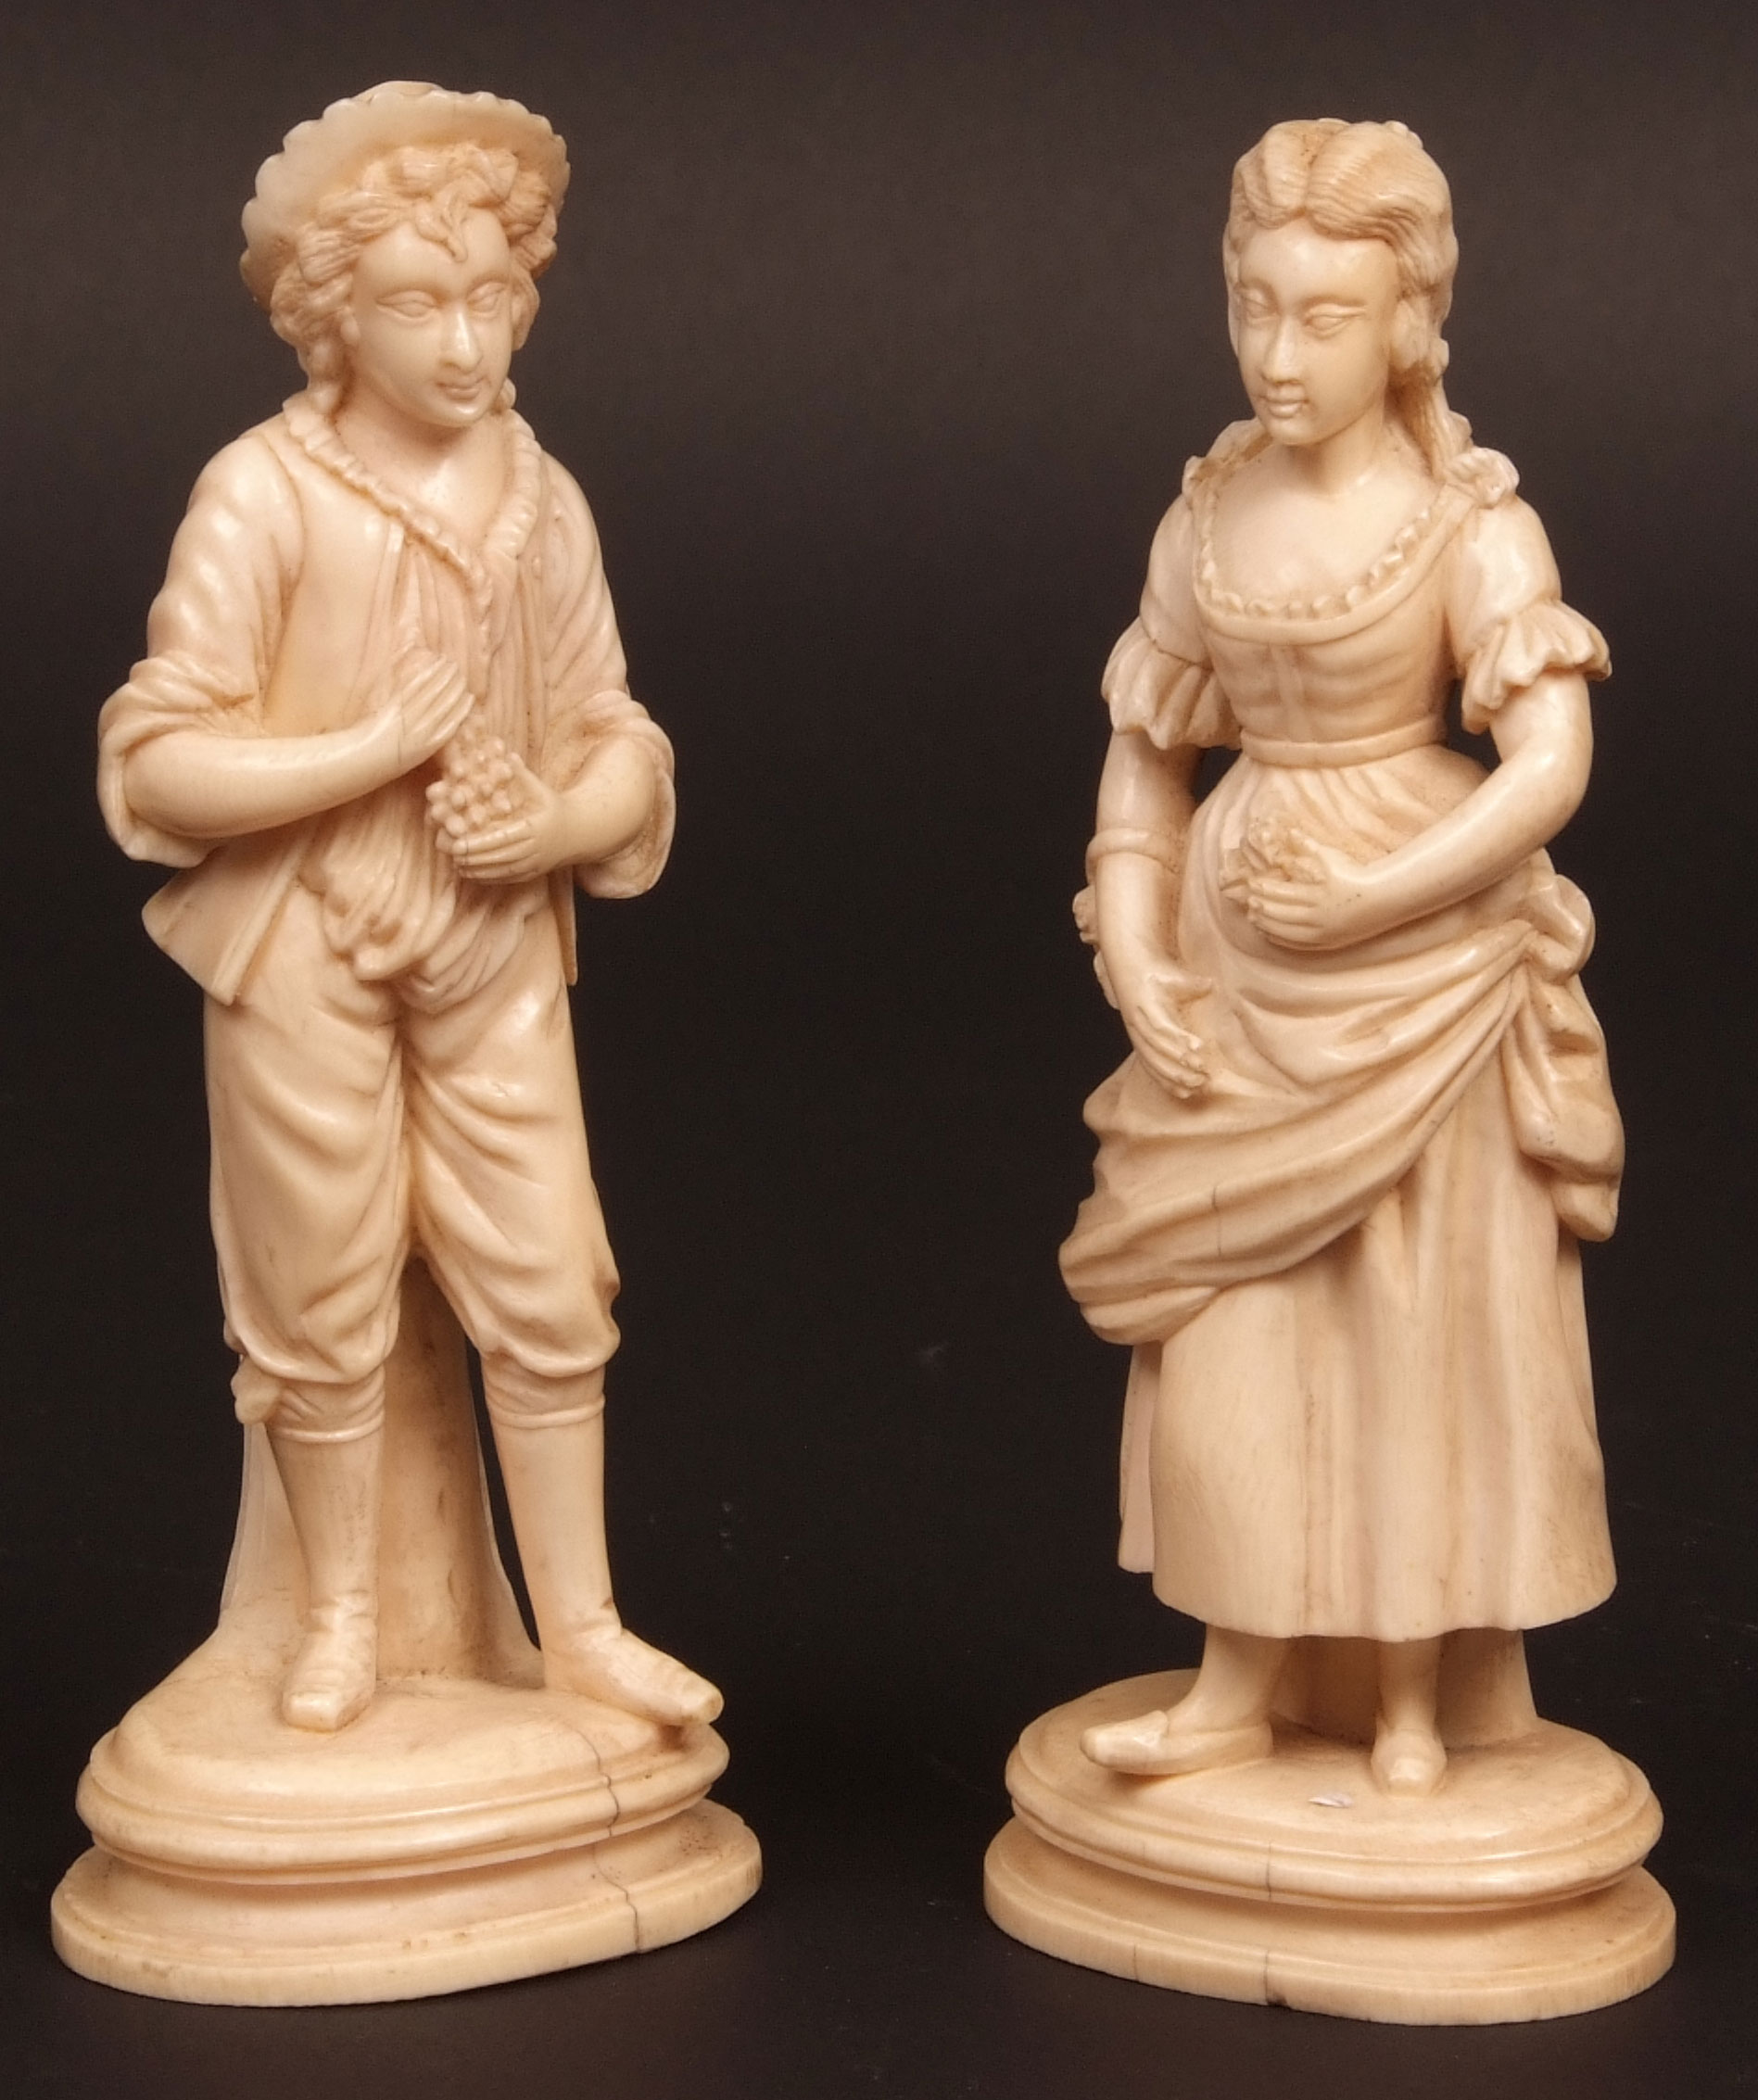 Pair of 19th century ivory carved figures of young man and woman in period costume, each clutching